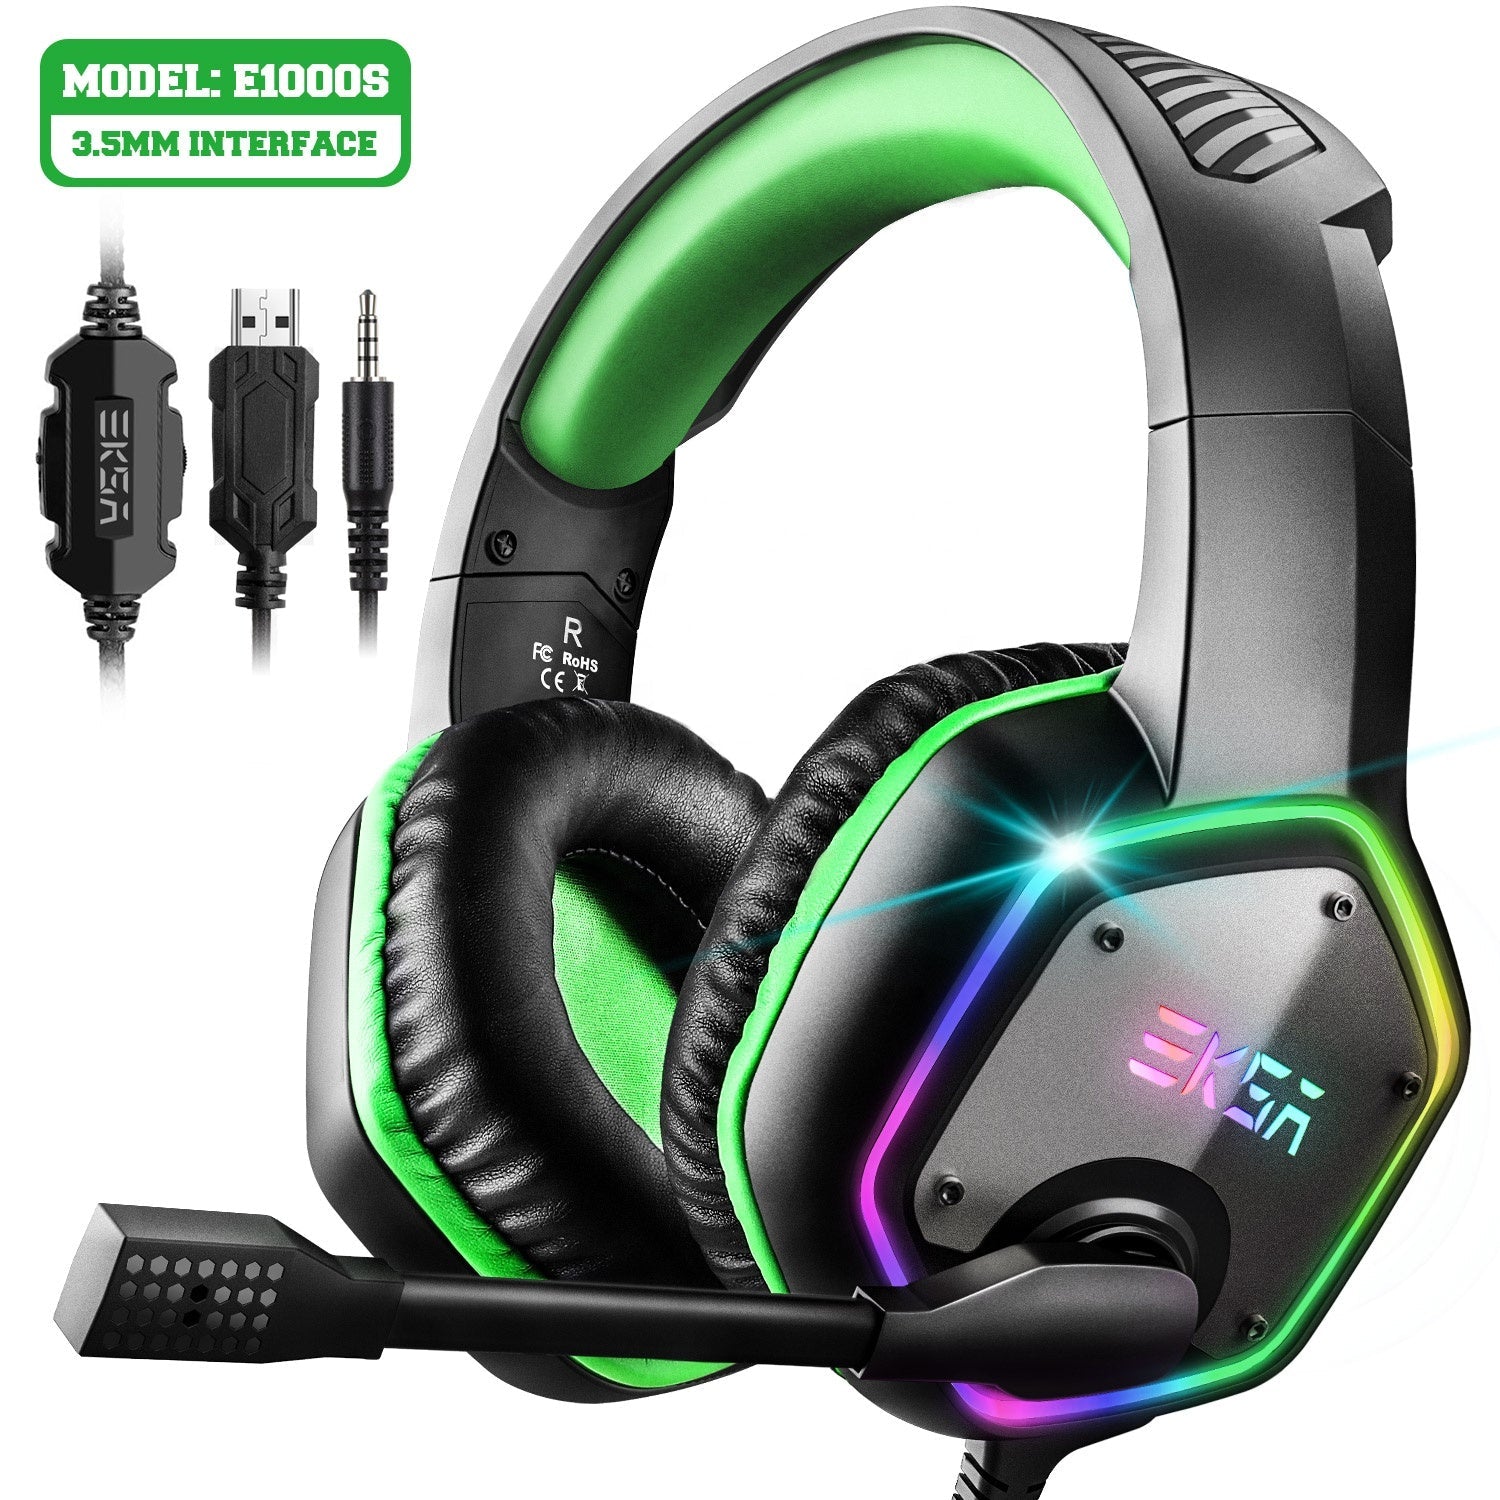 EKSA E1000 7.1 Surround Headset Gaming Color RGB Over Ea headset LED Display headset with microphone | Electrr Inc